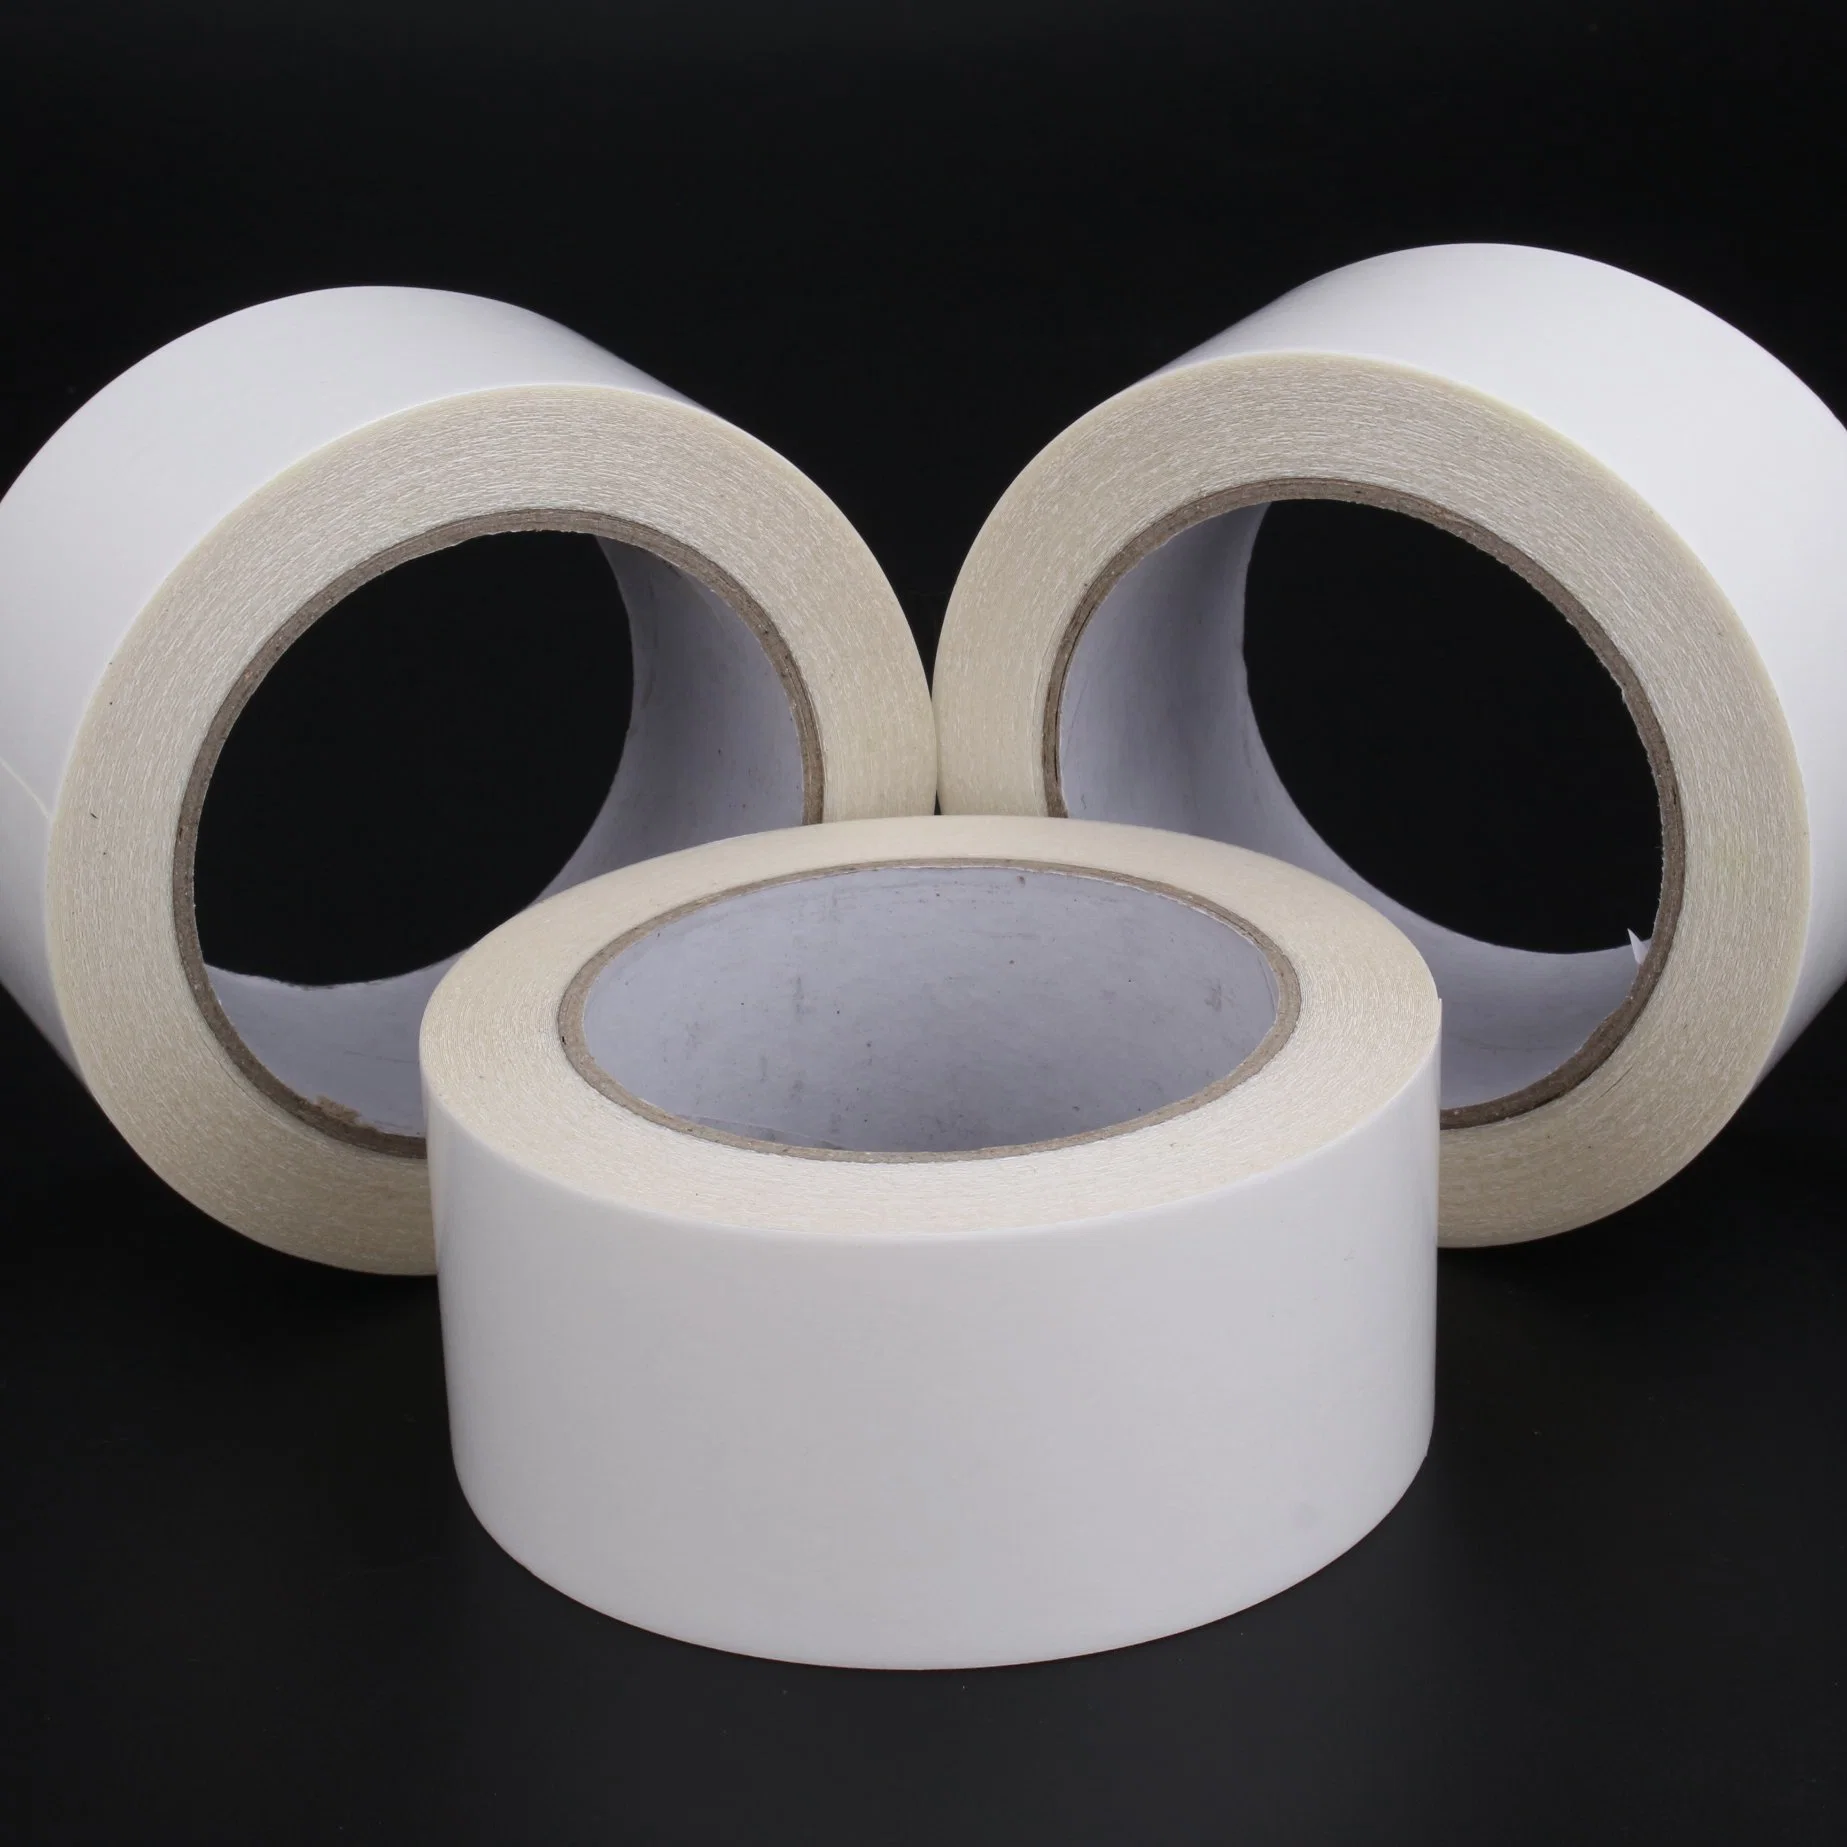 Bonding on Products with Coarse Surface Double Sided Tape